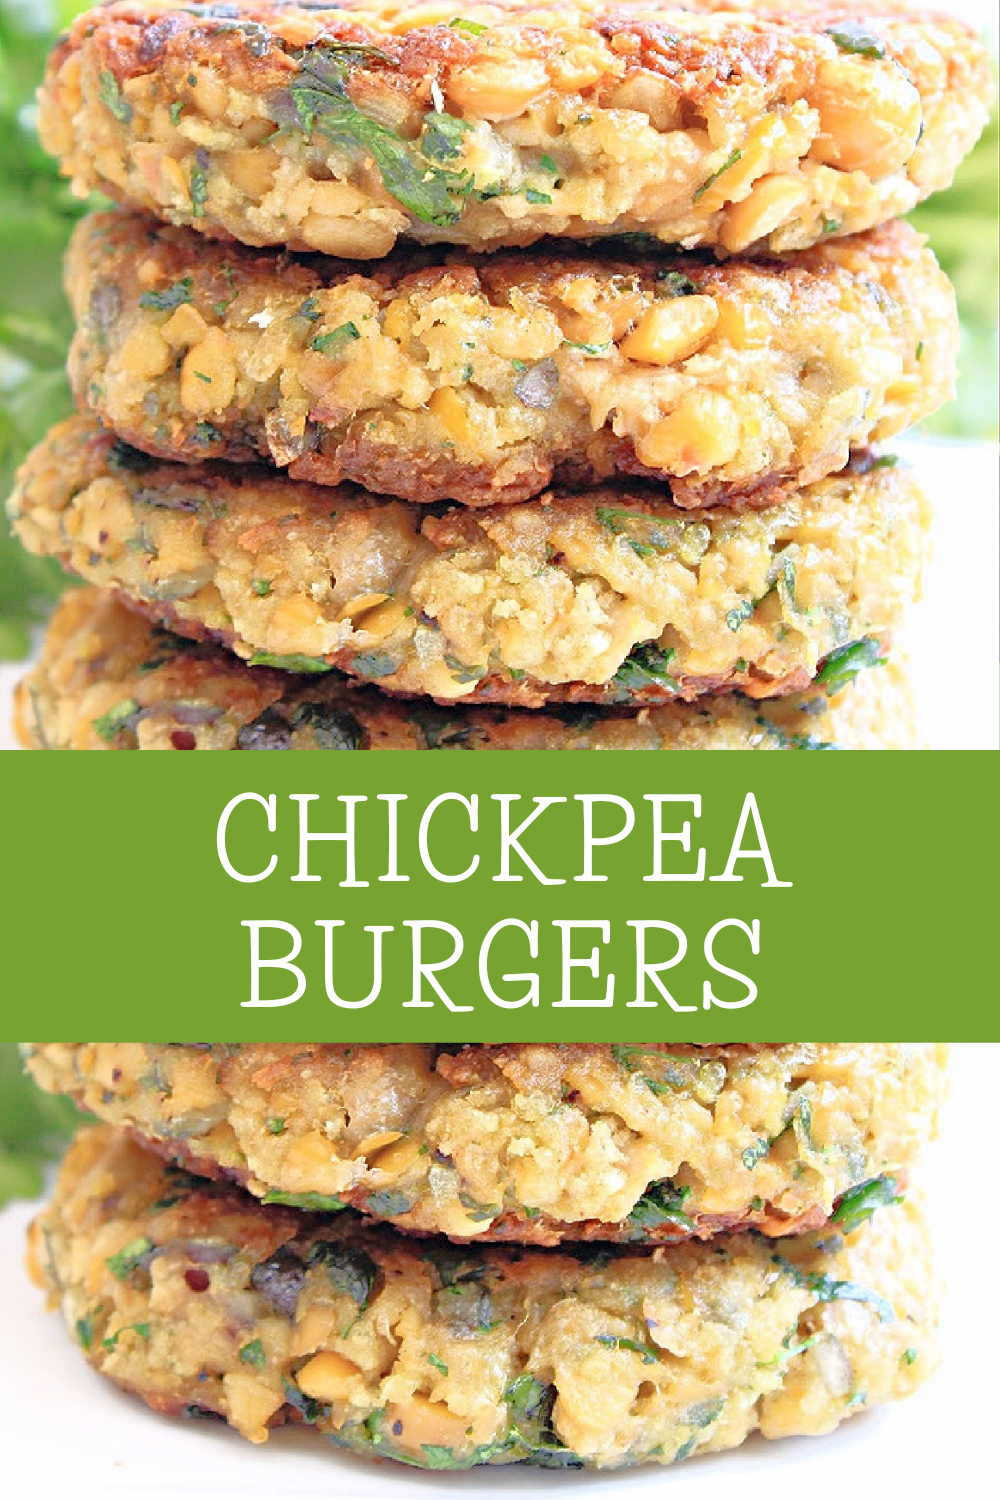 Chickpea Burgers ~ These vegan veggie burgers are quick and easy to make with simple ingredients. Ready to serve in 20 minutes! via @thiswifecooks